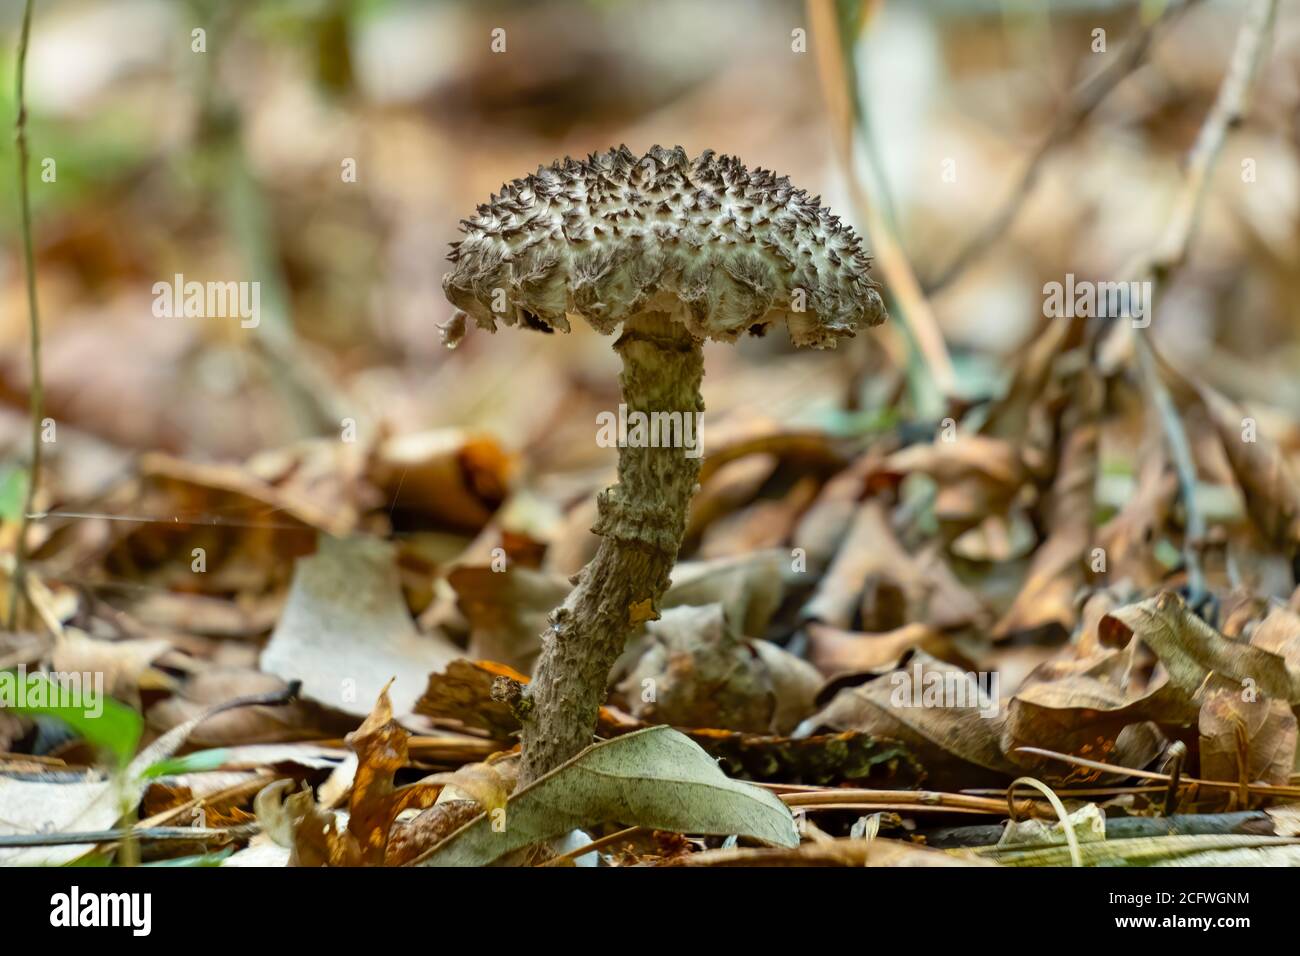 Old Man of the Woods mushroom (Strobilomyces strobilaceus) growing the forest. Raleigh, North Carolina. Stock Photo